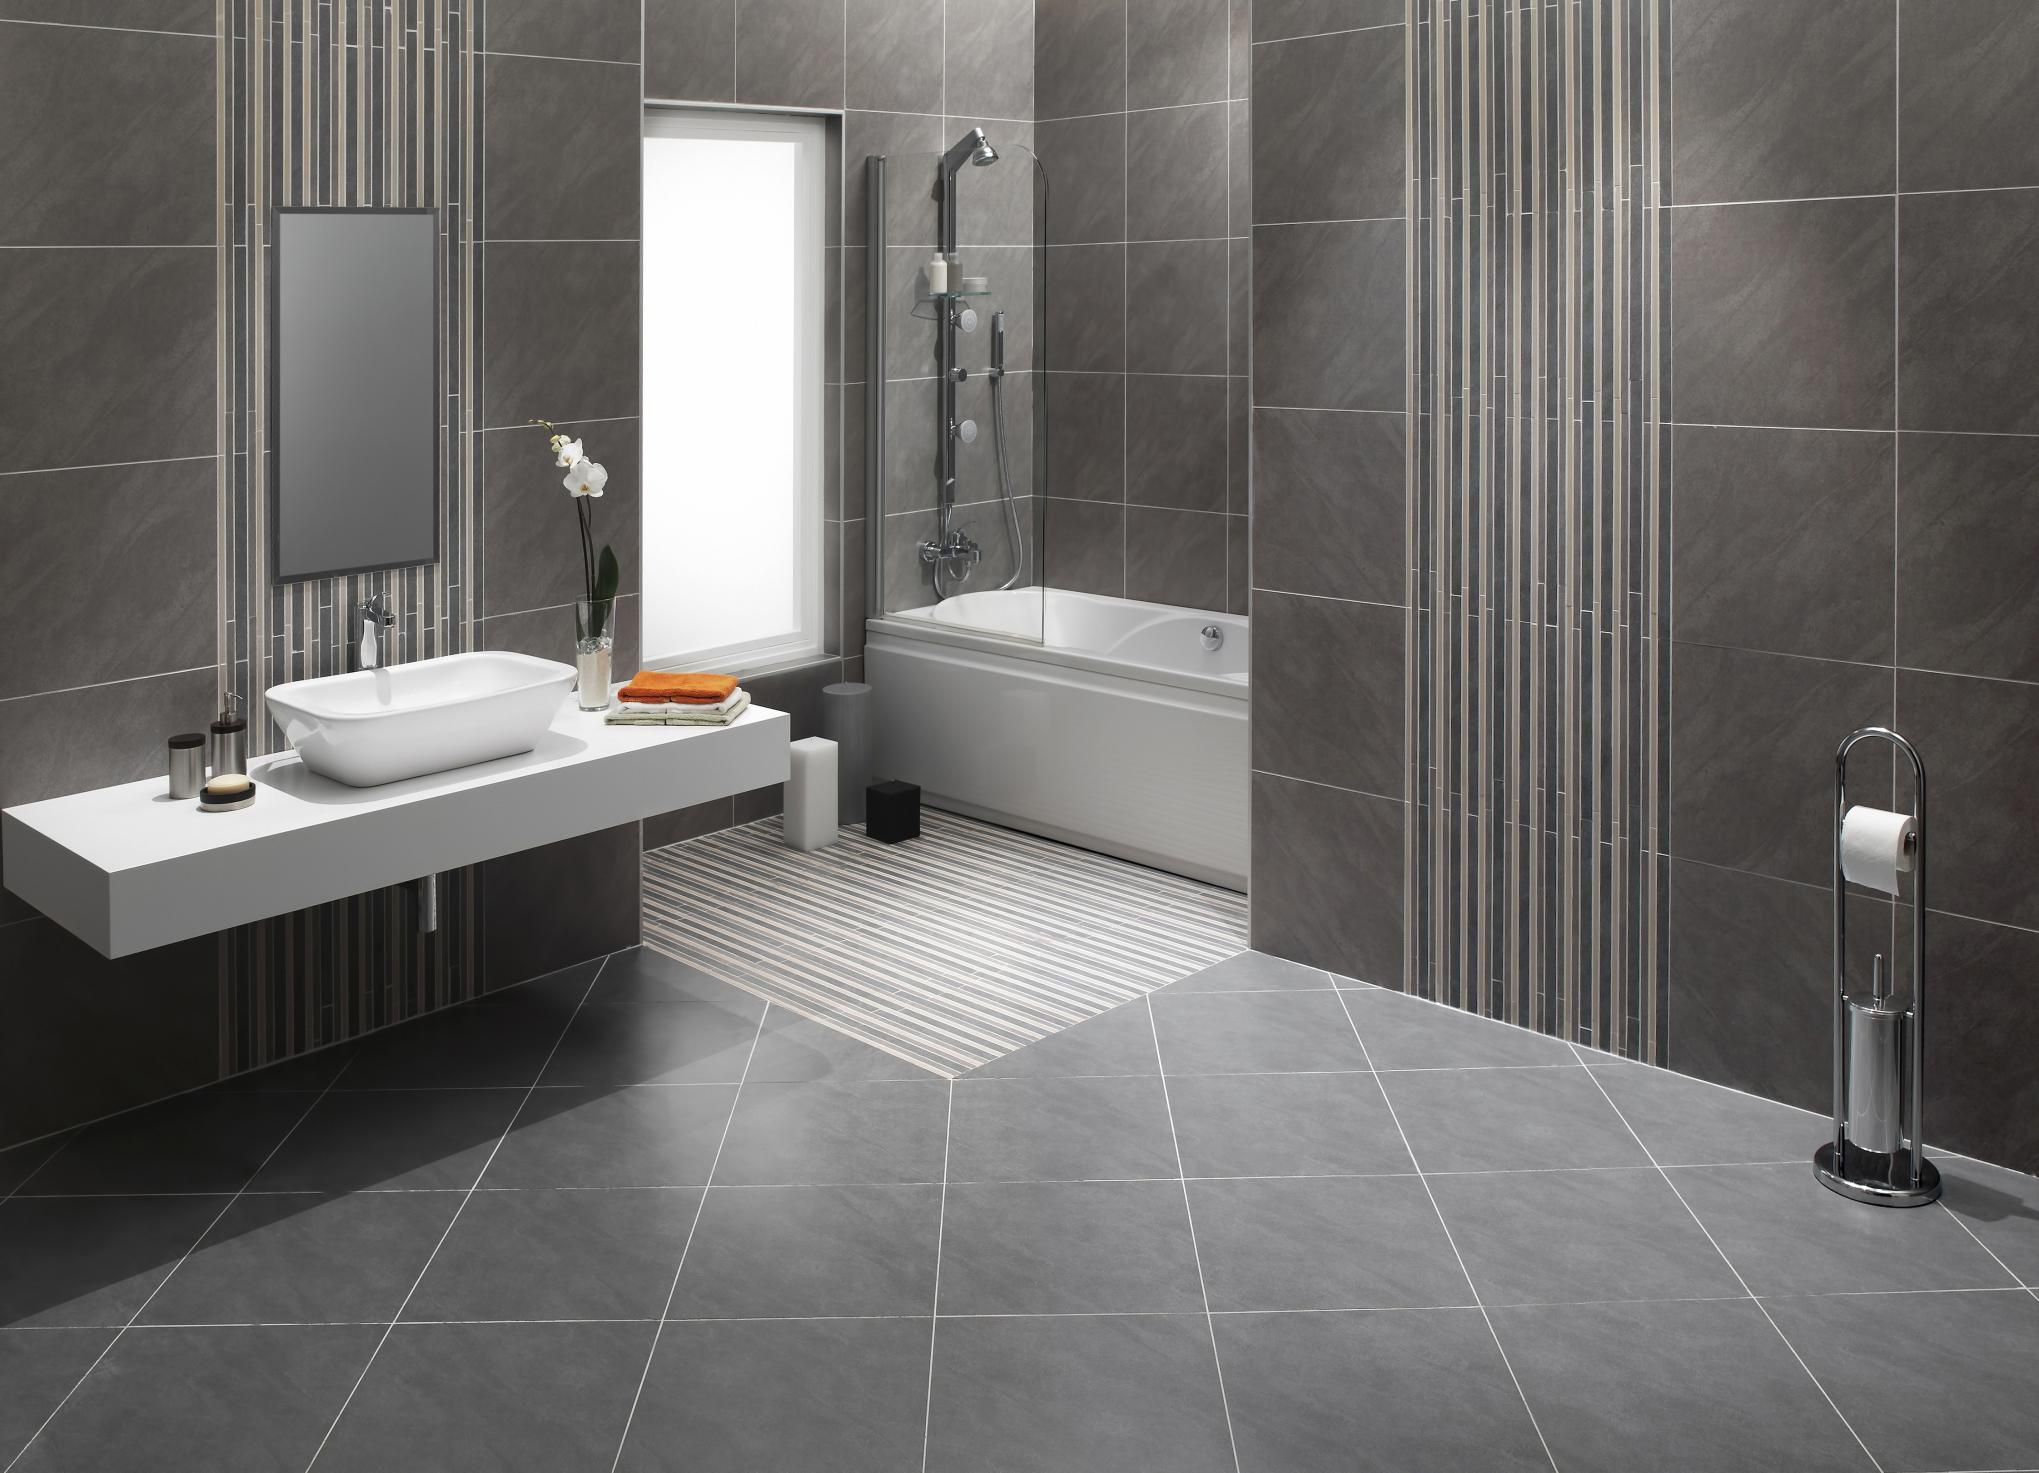 Stone Tiles For Bathroom
 Pros and Cons of Natural Stone Tile for Bathrooms